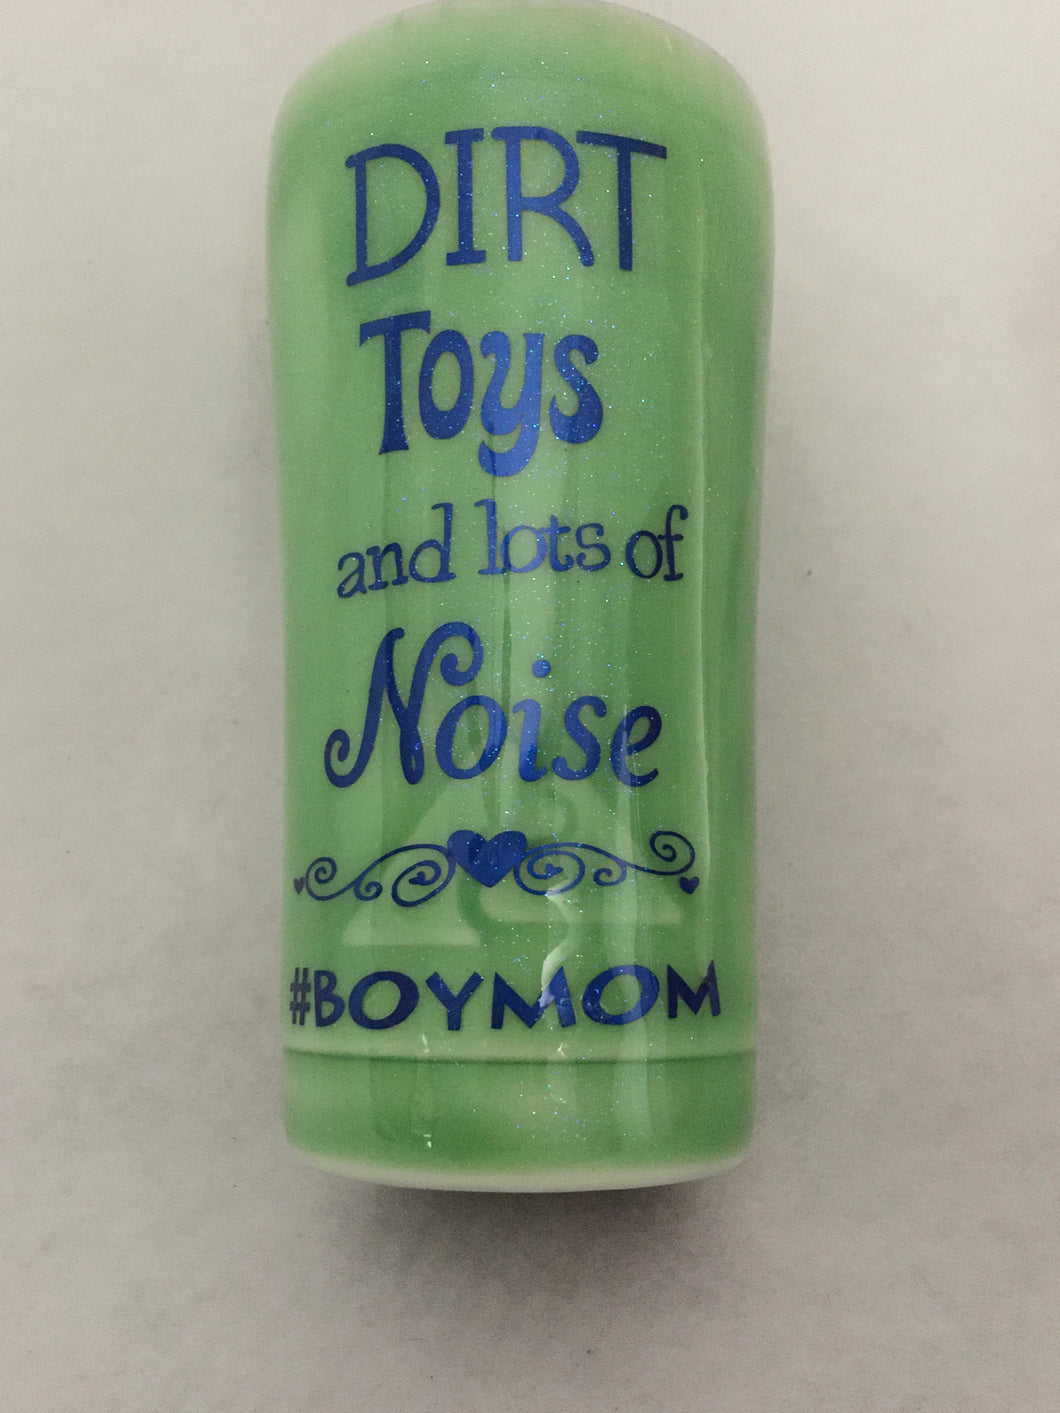 #BOYMOM CUP Dirt TOYS and lots of Noise #BOYMOM!